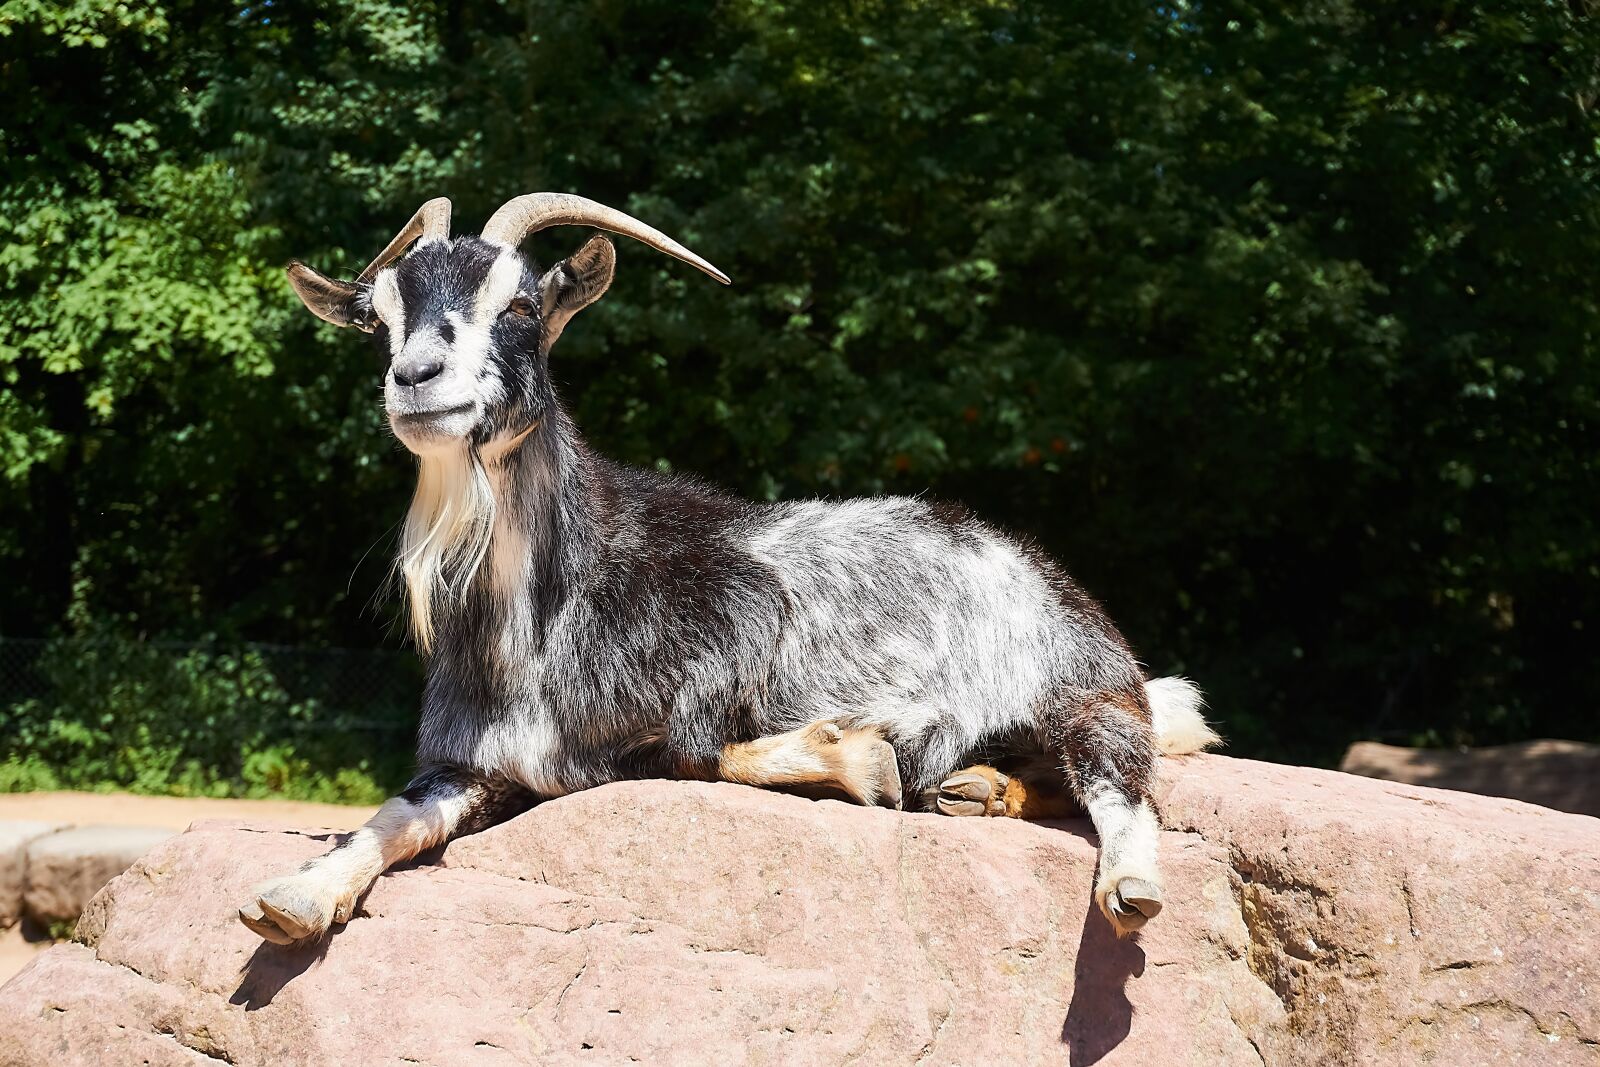 Sony a6000 + Sony E PZ 16-50 mm F3.5-5.6 OSS (SELP1650) sample photo. Goat, petting zoo, animal photography